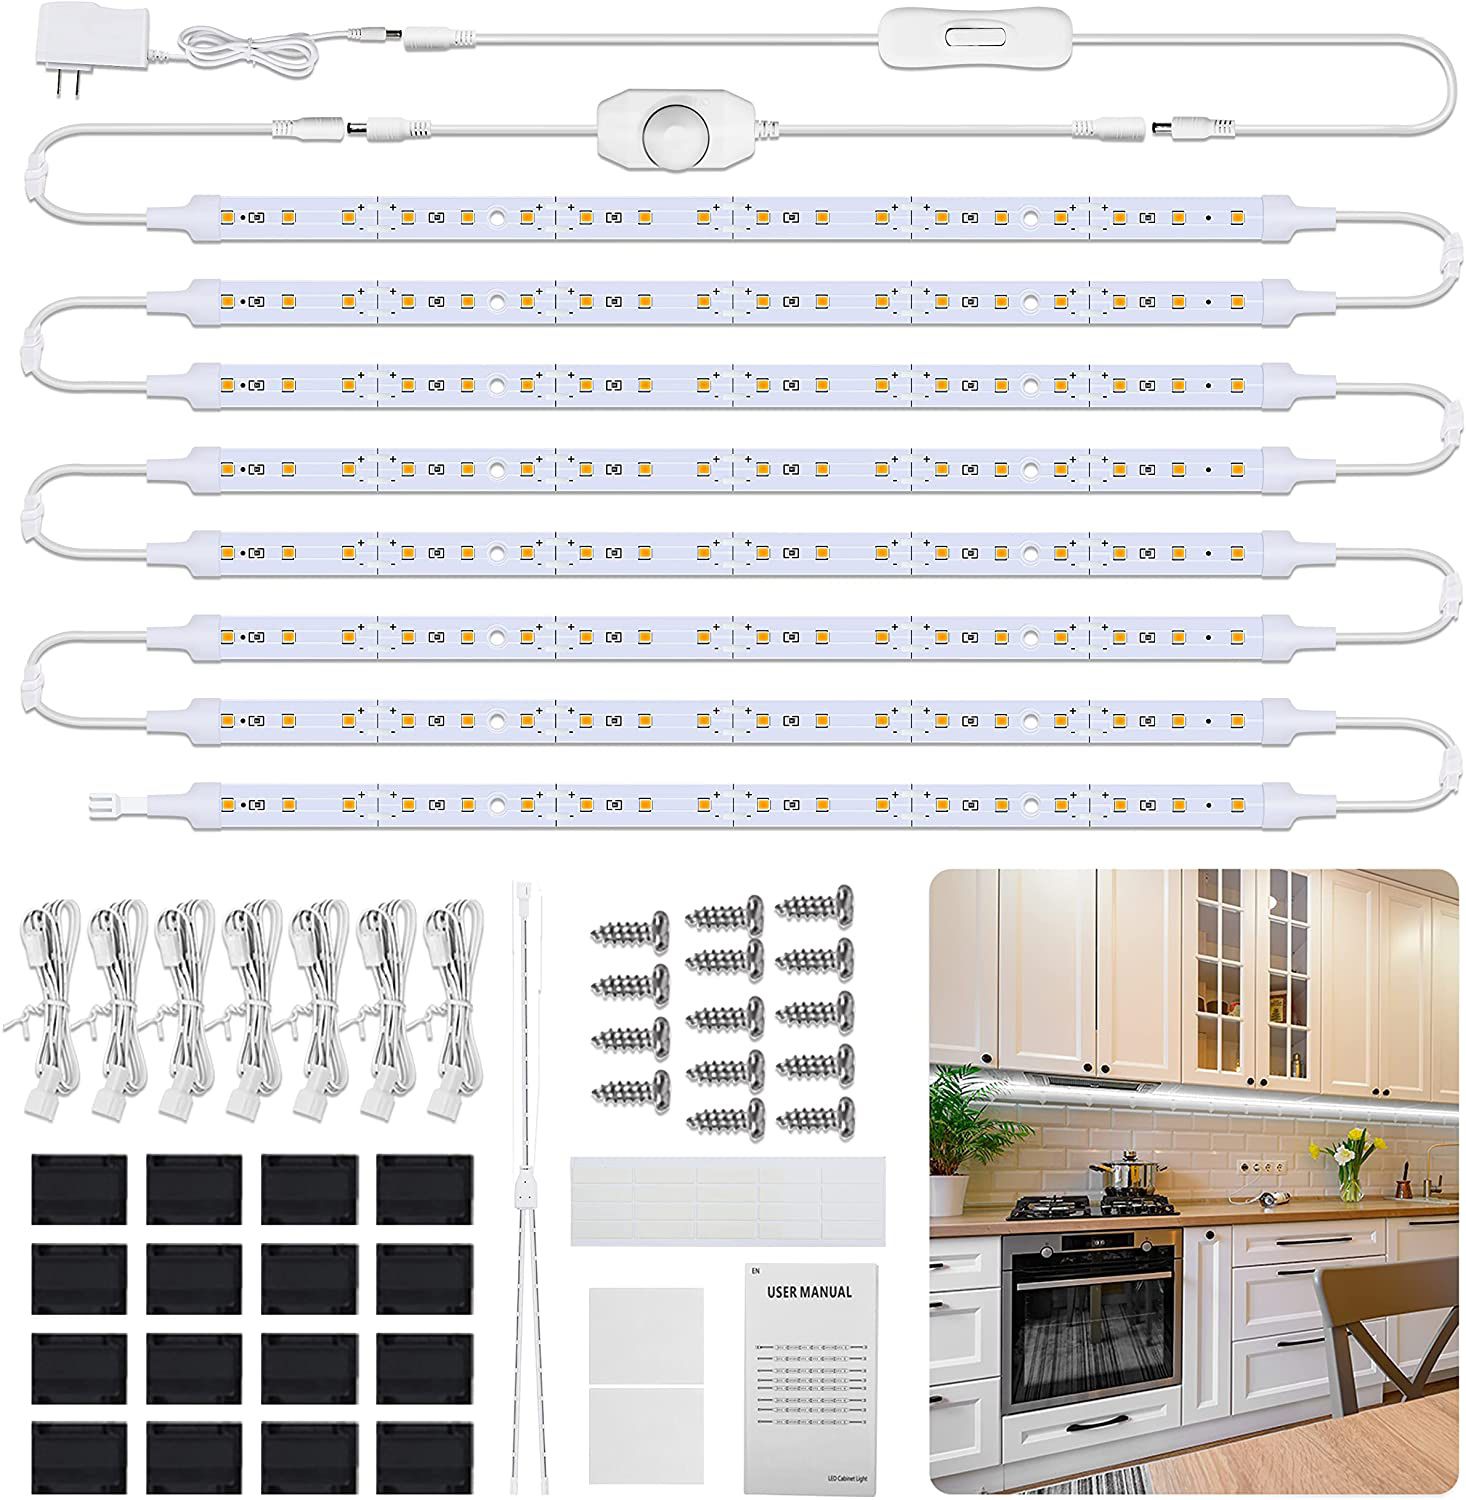 "LED Under Cabinet Lighting for Kitchen, 8 PCS 12"" Under Counter Lights Dimmable Under Cabinet Lights with Adapter Extension Cable for Kitchen Cabine